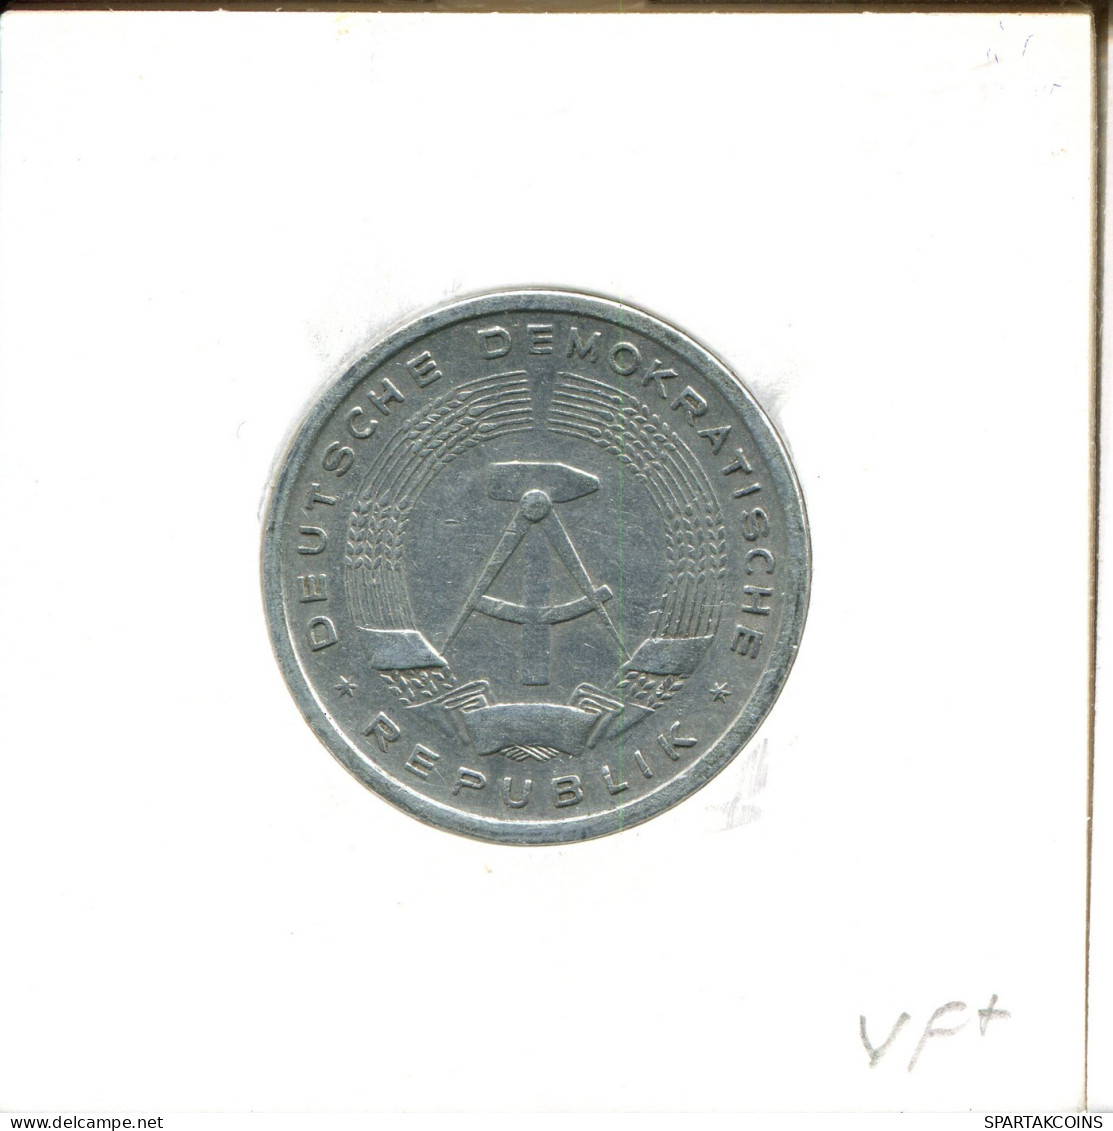 1 DM 1956 A DDR EAST ALLEMAGNE Pièce GERMANY #DB106.F.A - 1 Mark